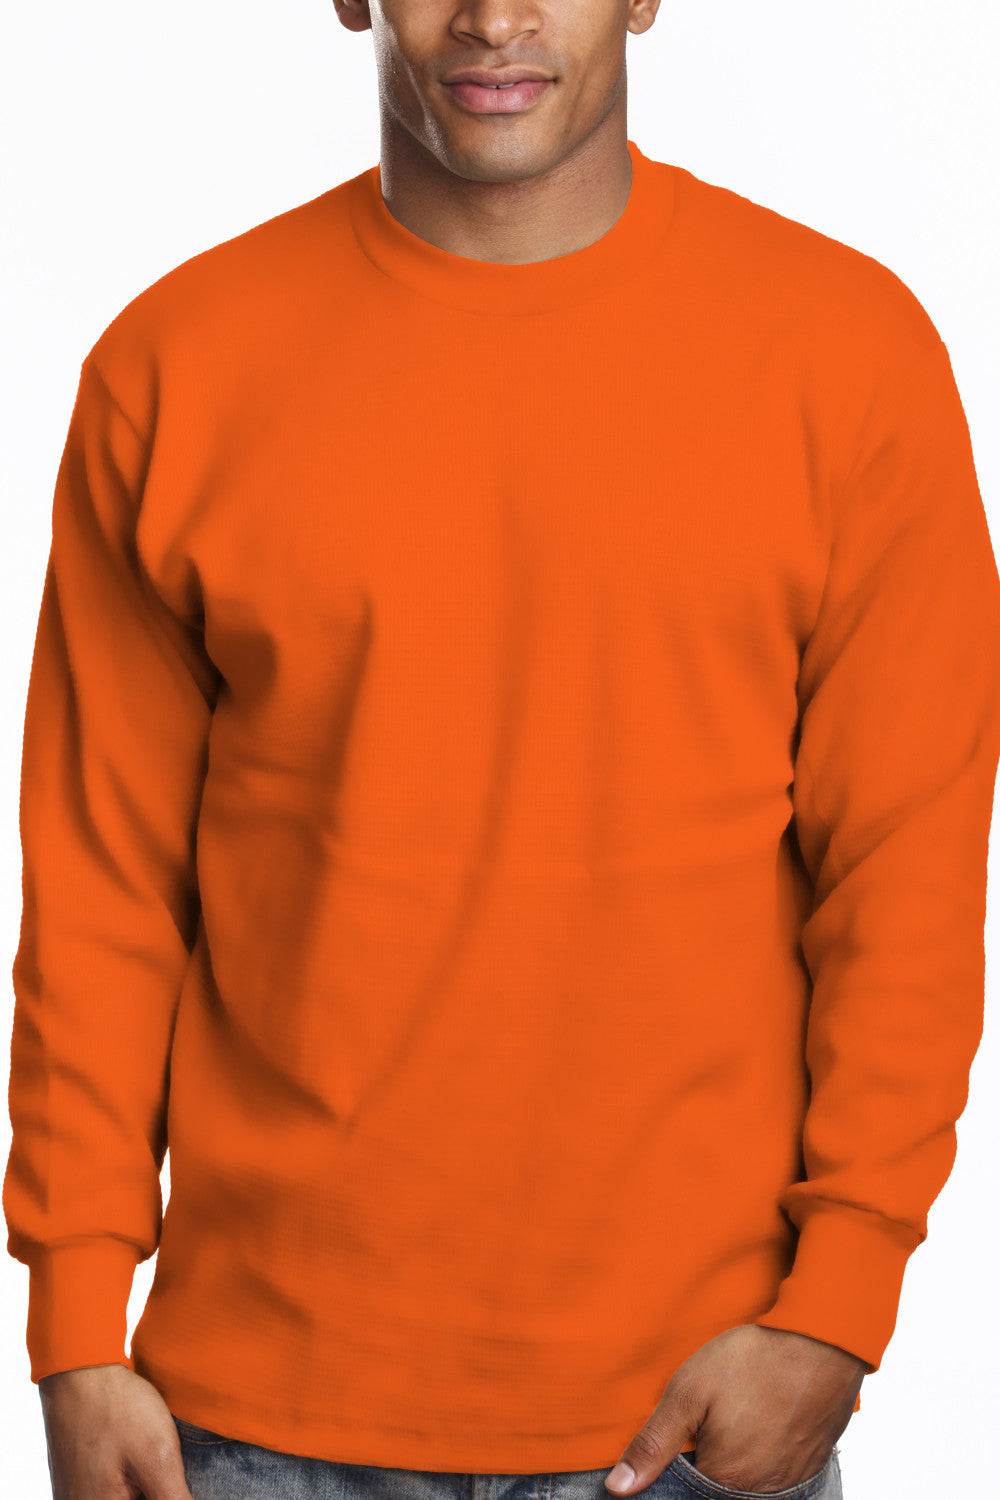 Heavy Long Sleeve Orange Tee: Iconic long sleeve, snug round neck, 6.7oz. Lycra reinforced collar. Bright fade-resistant colors. U.S. cotton. Available Sizes: L Tall-5X tall, Colors: White, Black, Grey, more. Fabric: Solid-100% Cotton, Grey Shades-80% Cotton 20% Poly. Weight: 6.7 oz